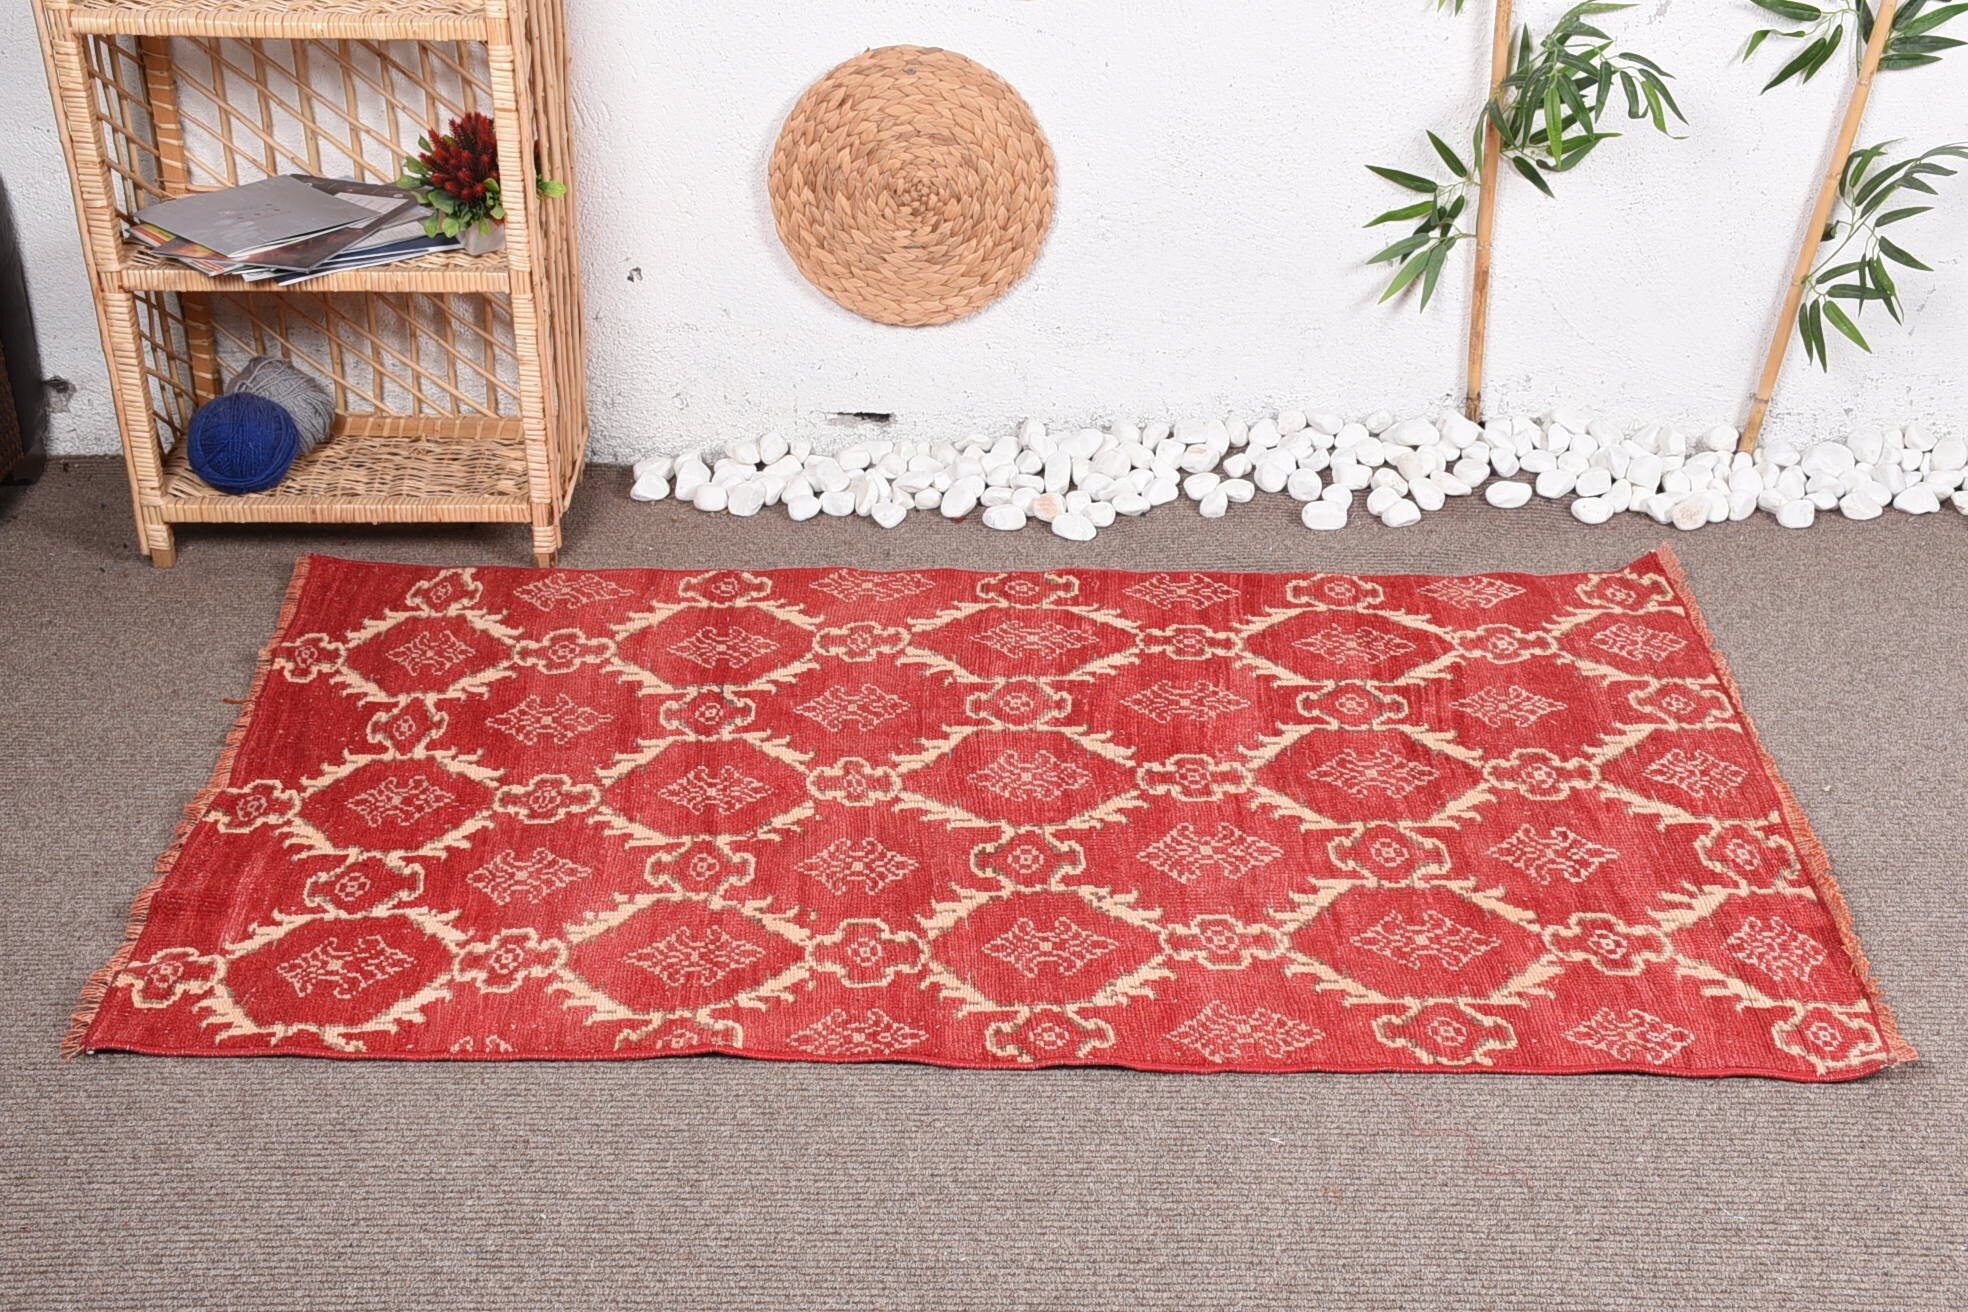 Turkey Rug, Rugs for Entry, Red Wool Rug, Old Rug, Turkish Rug, 3.2x5.2 ft Accent Rugs, Bedroom Rugs, Anatolian Rug, Vintage Rug, Entry Rug